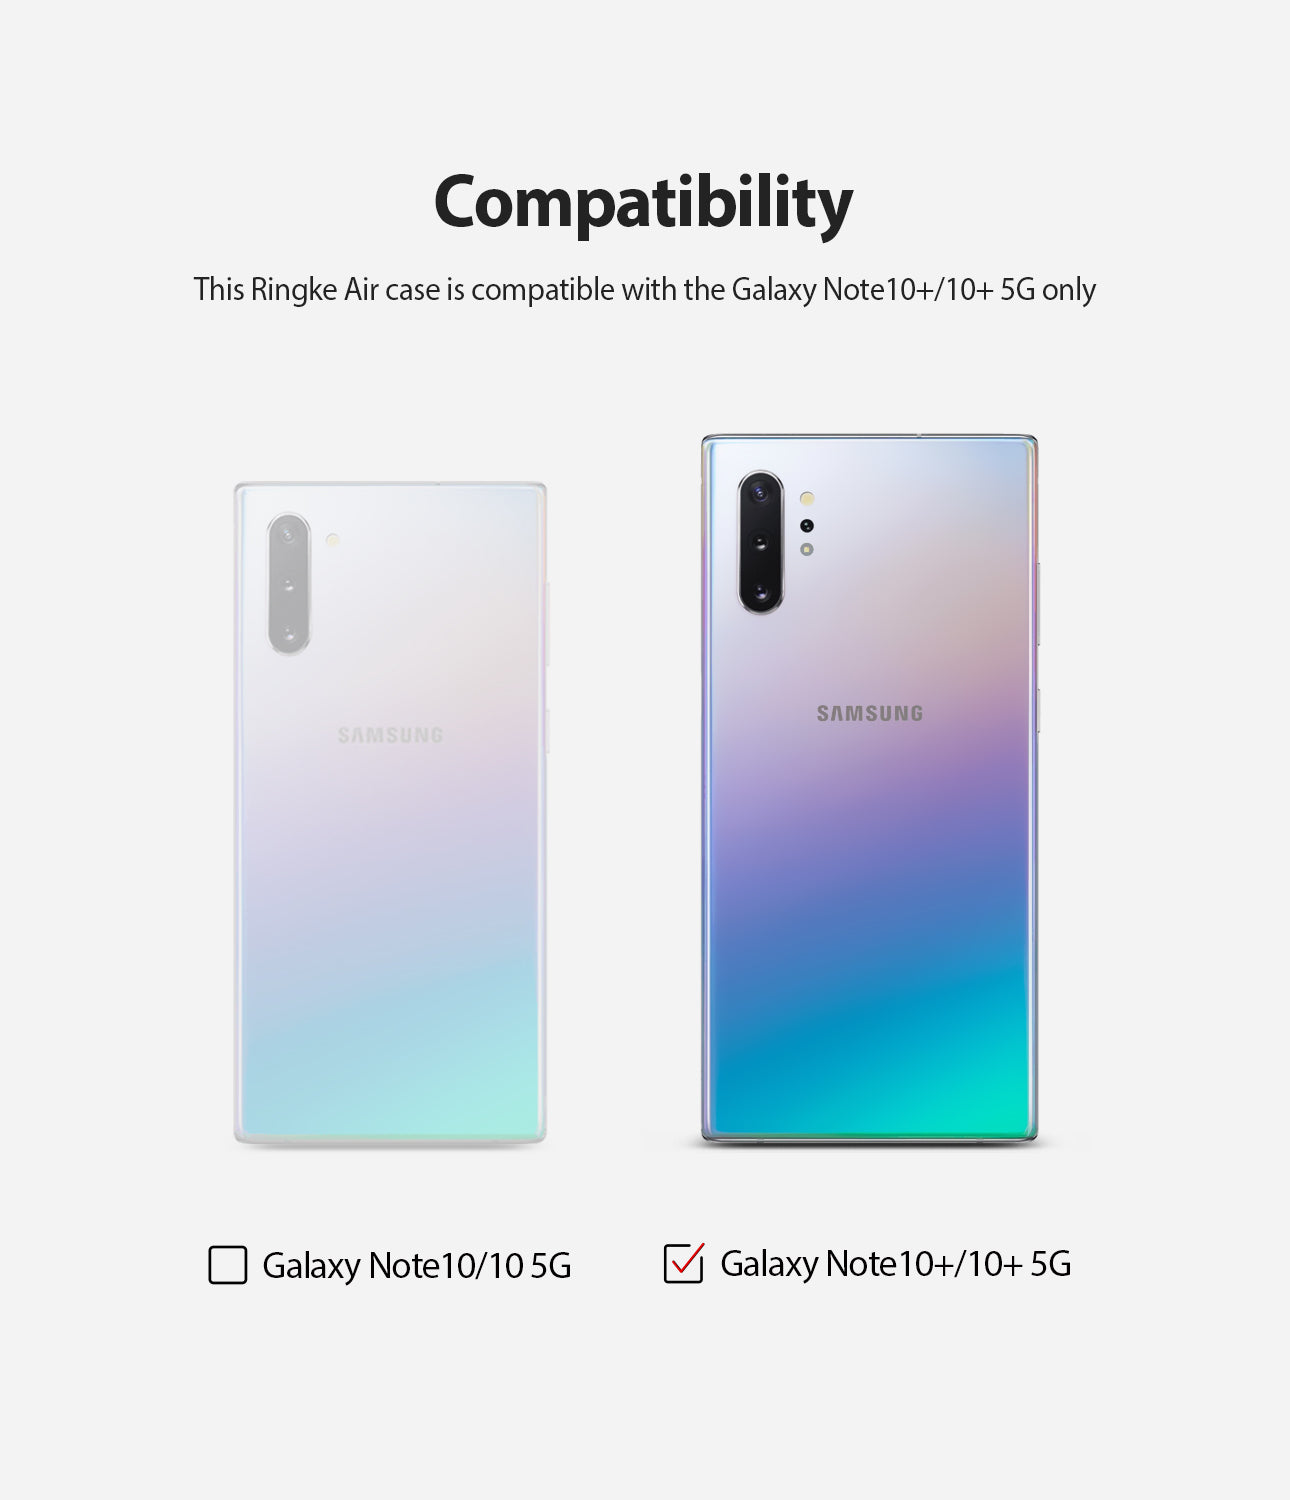 compatible only with galaxy note10+